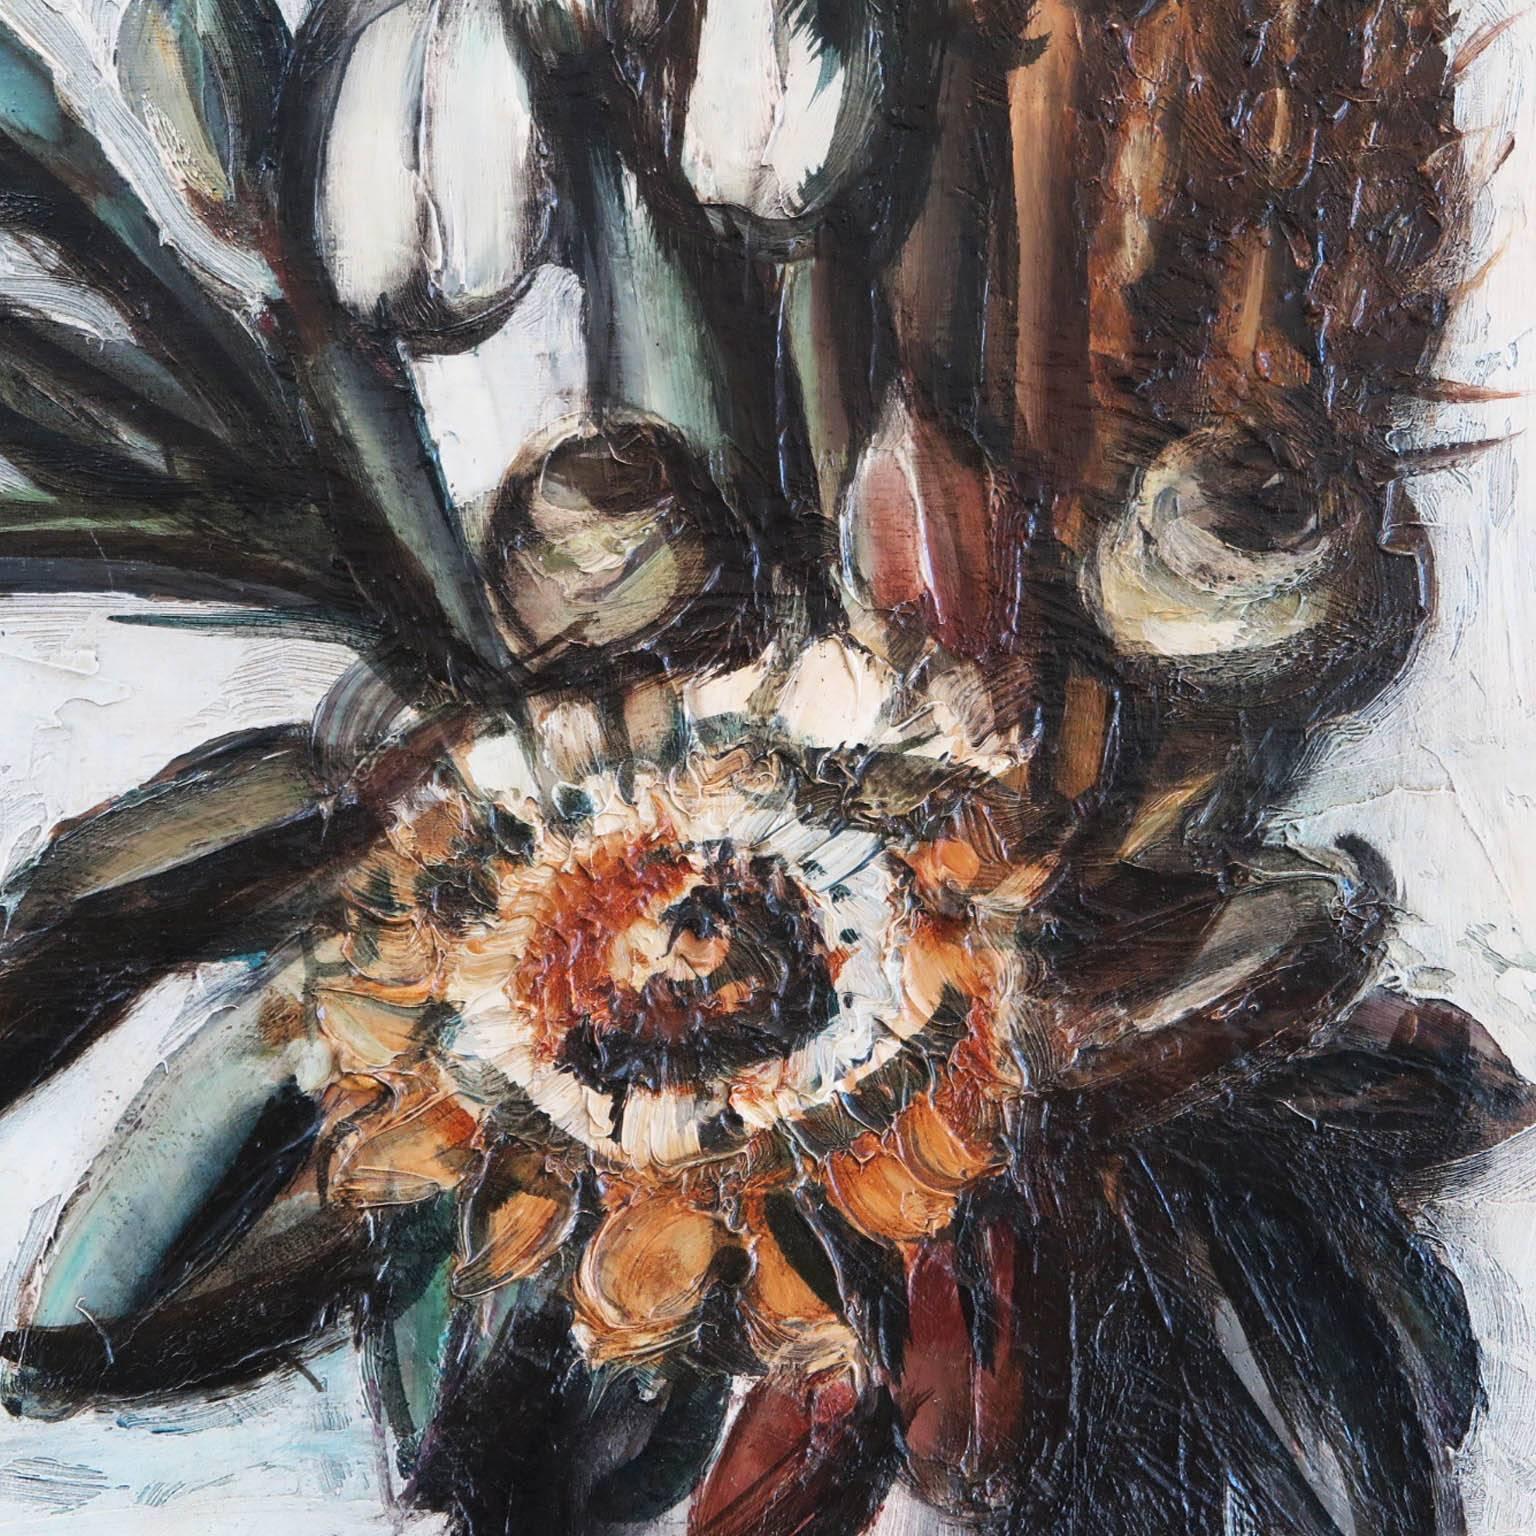 German born artist, Franz Priking (1929-1979) painted this flower still life. Oil on canvas and signed on lower right. Newly framed in Macassar.
Priking studied at The Bauhaus and the Academy of Arts in Berlin. After moving to France in 1950,